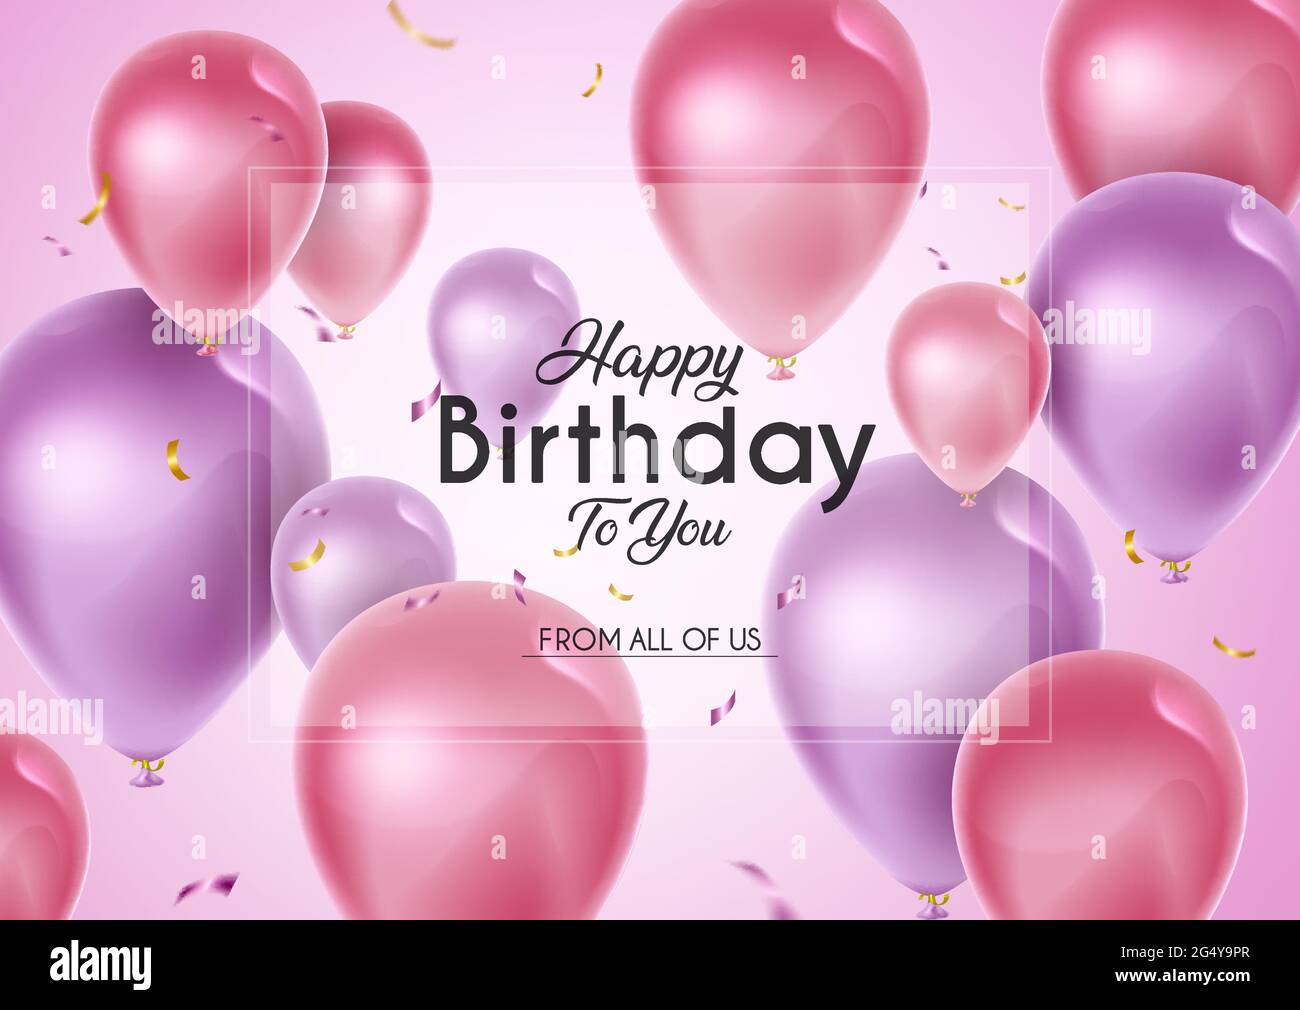 Birthday balloons vector banner template. Happy birthday to you text in ...